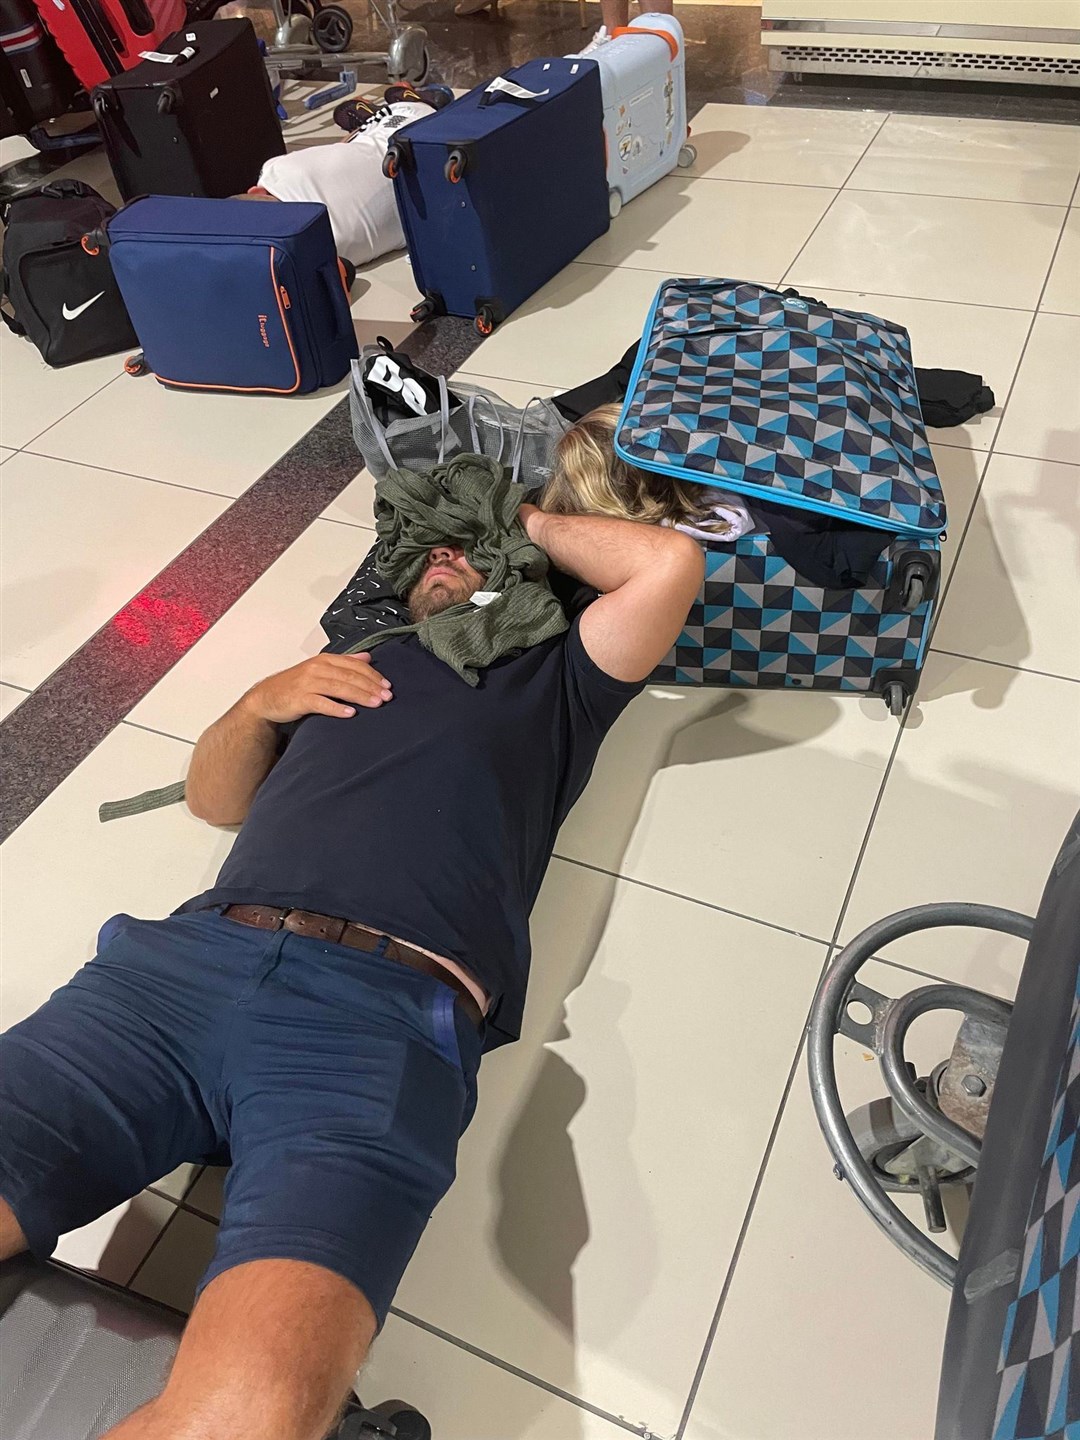 The scenes at Antalya Airport, where people were left sleeping on the floor.